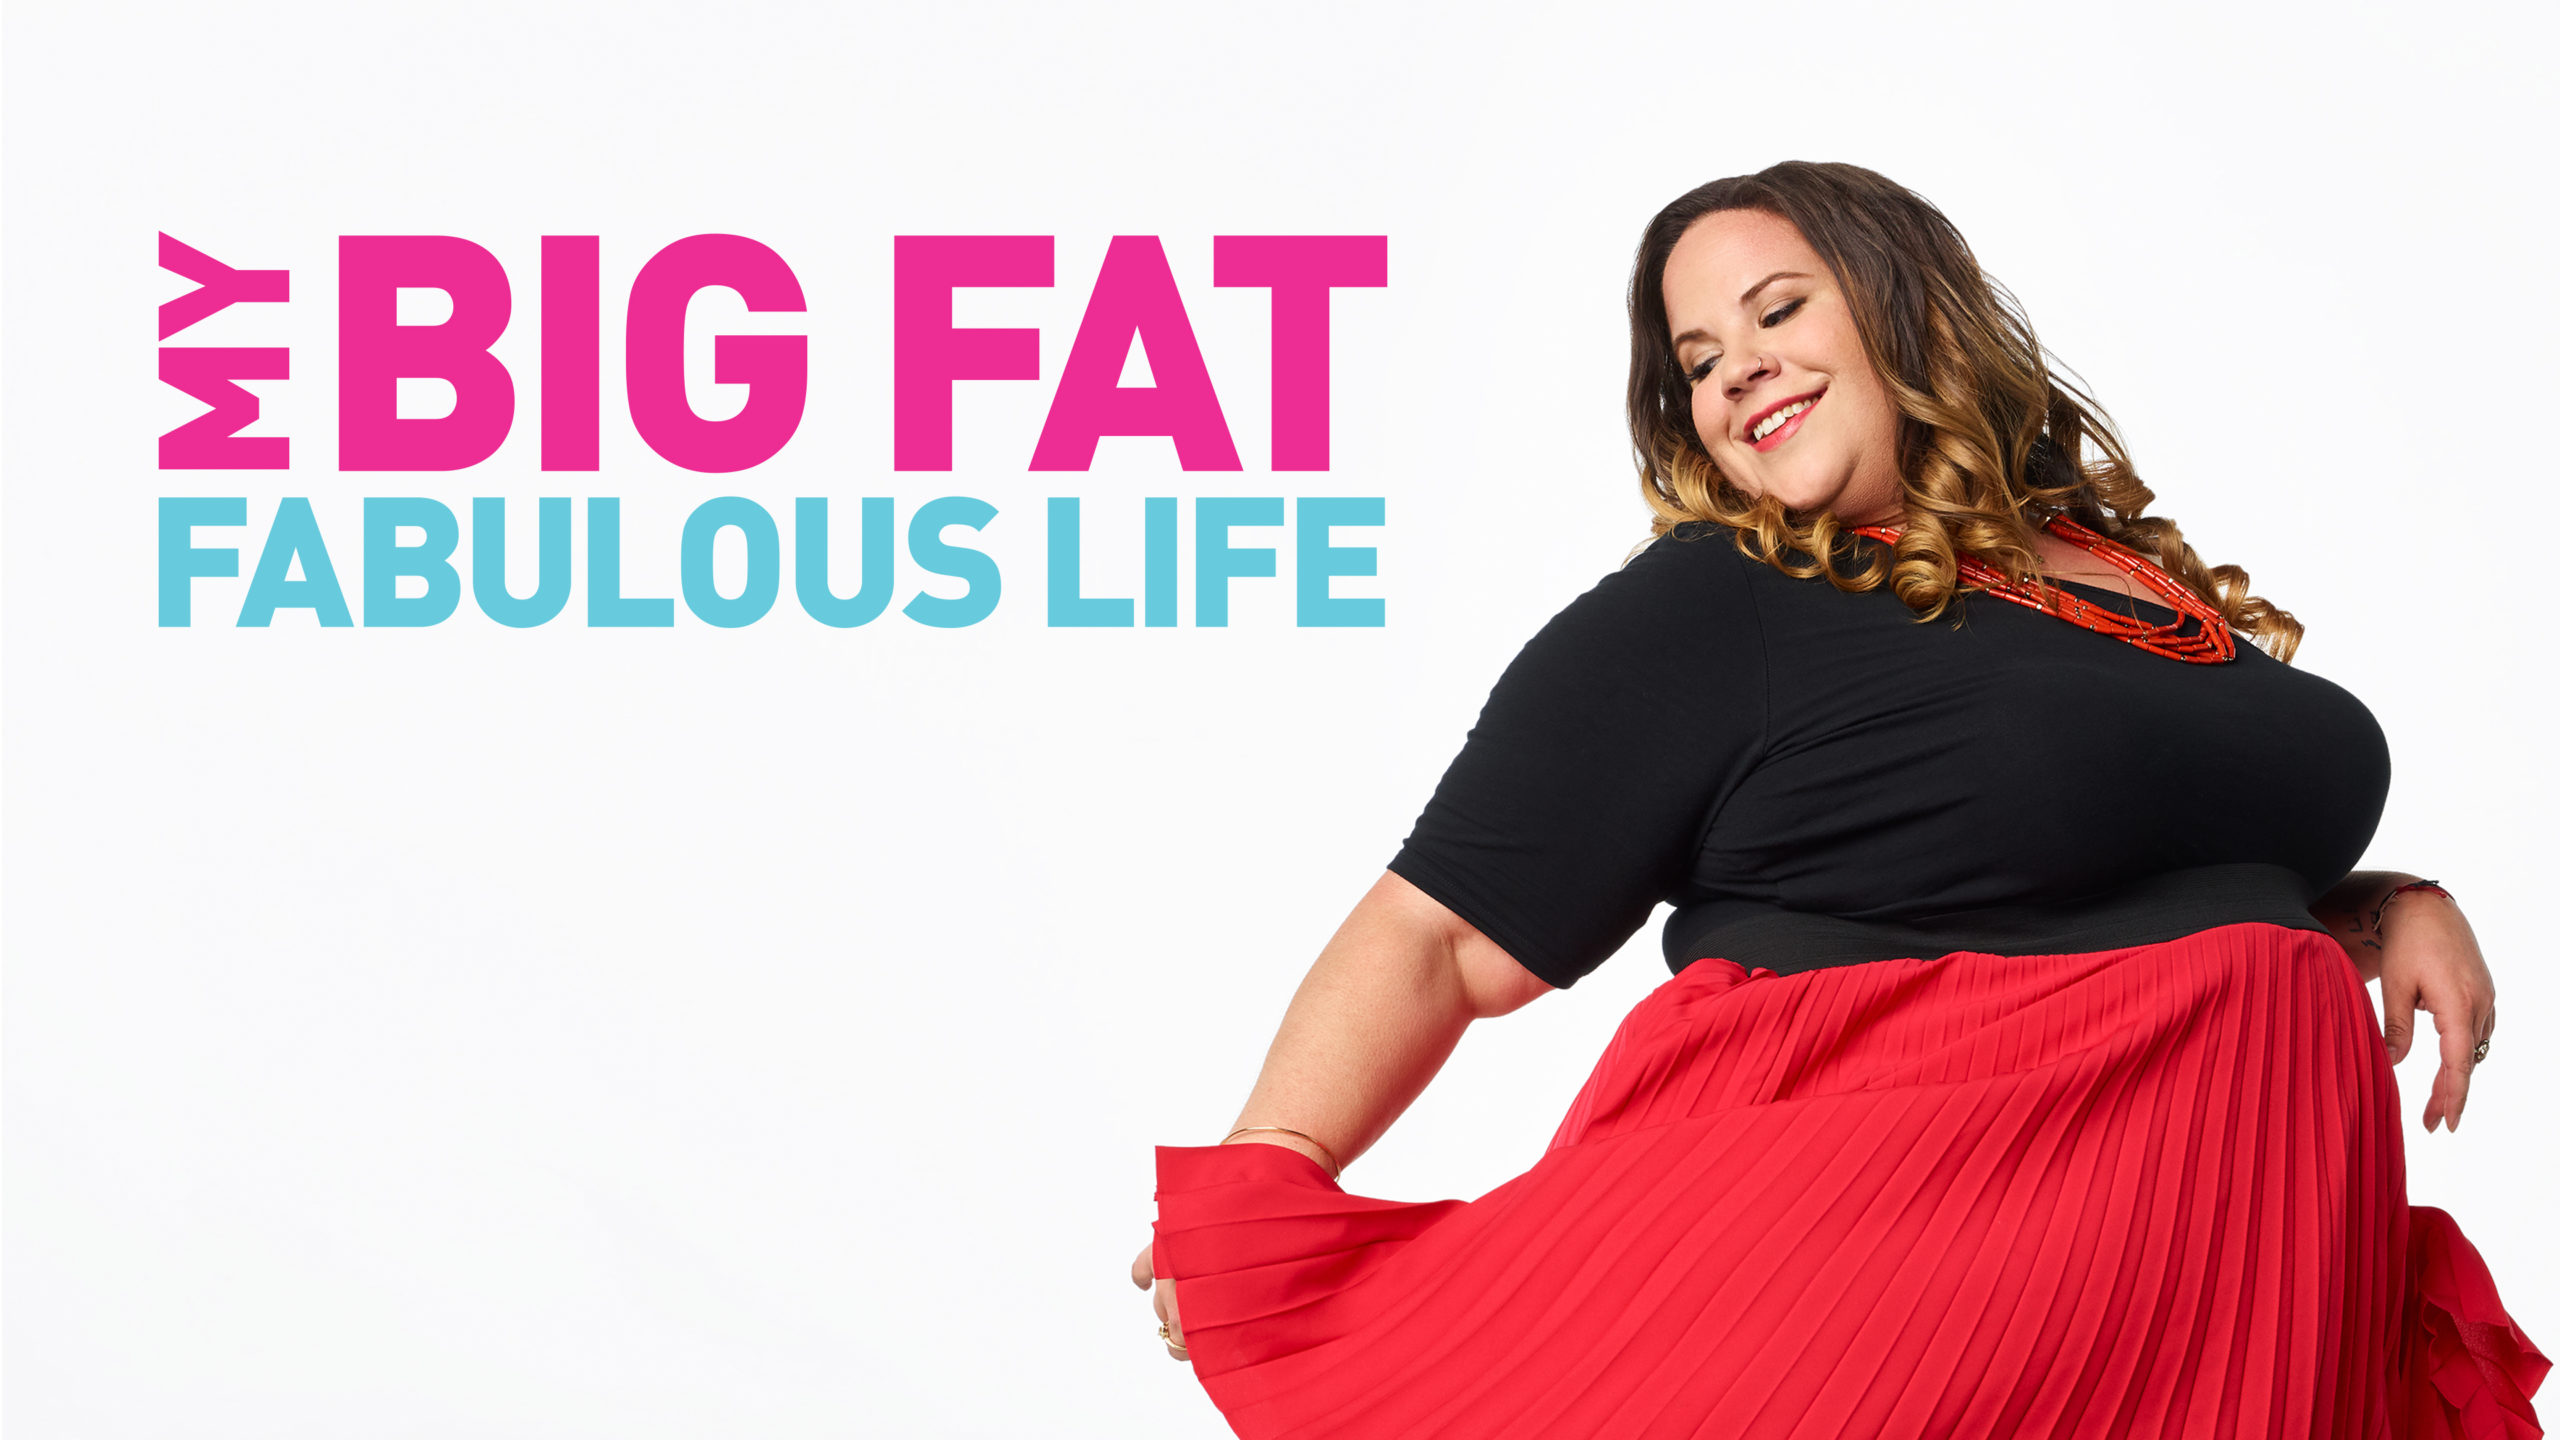 TLC My Big Fat Fabulous Life Whitney Way Thore Beau Love What We Know!